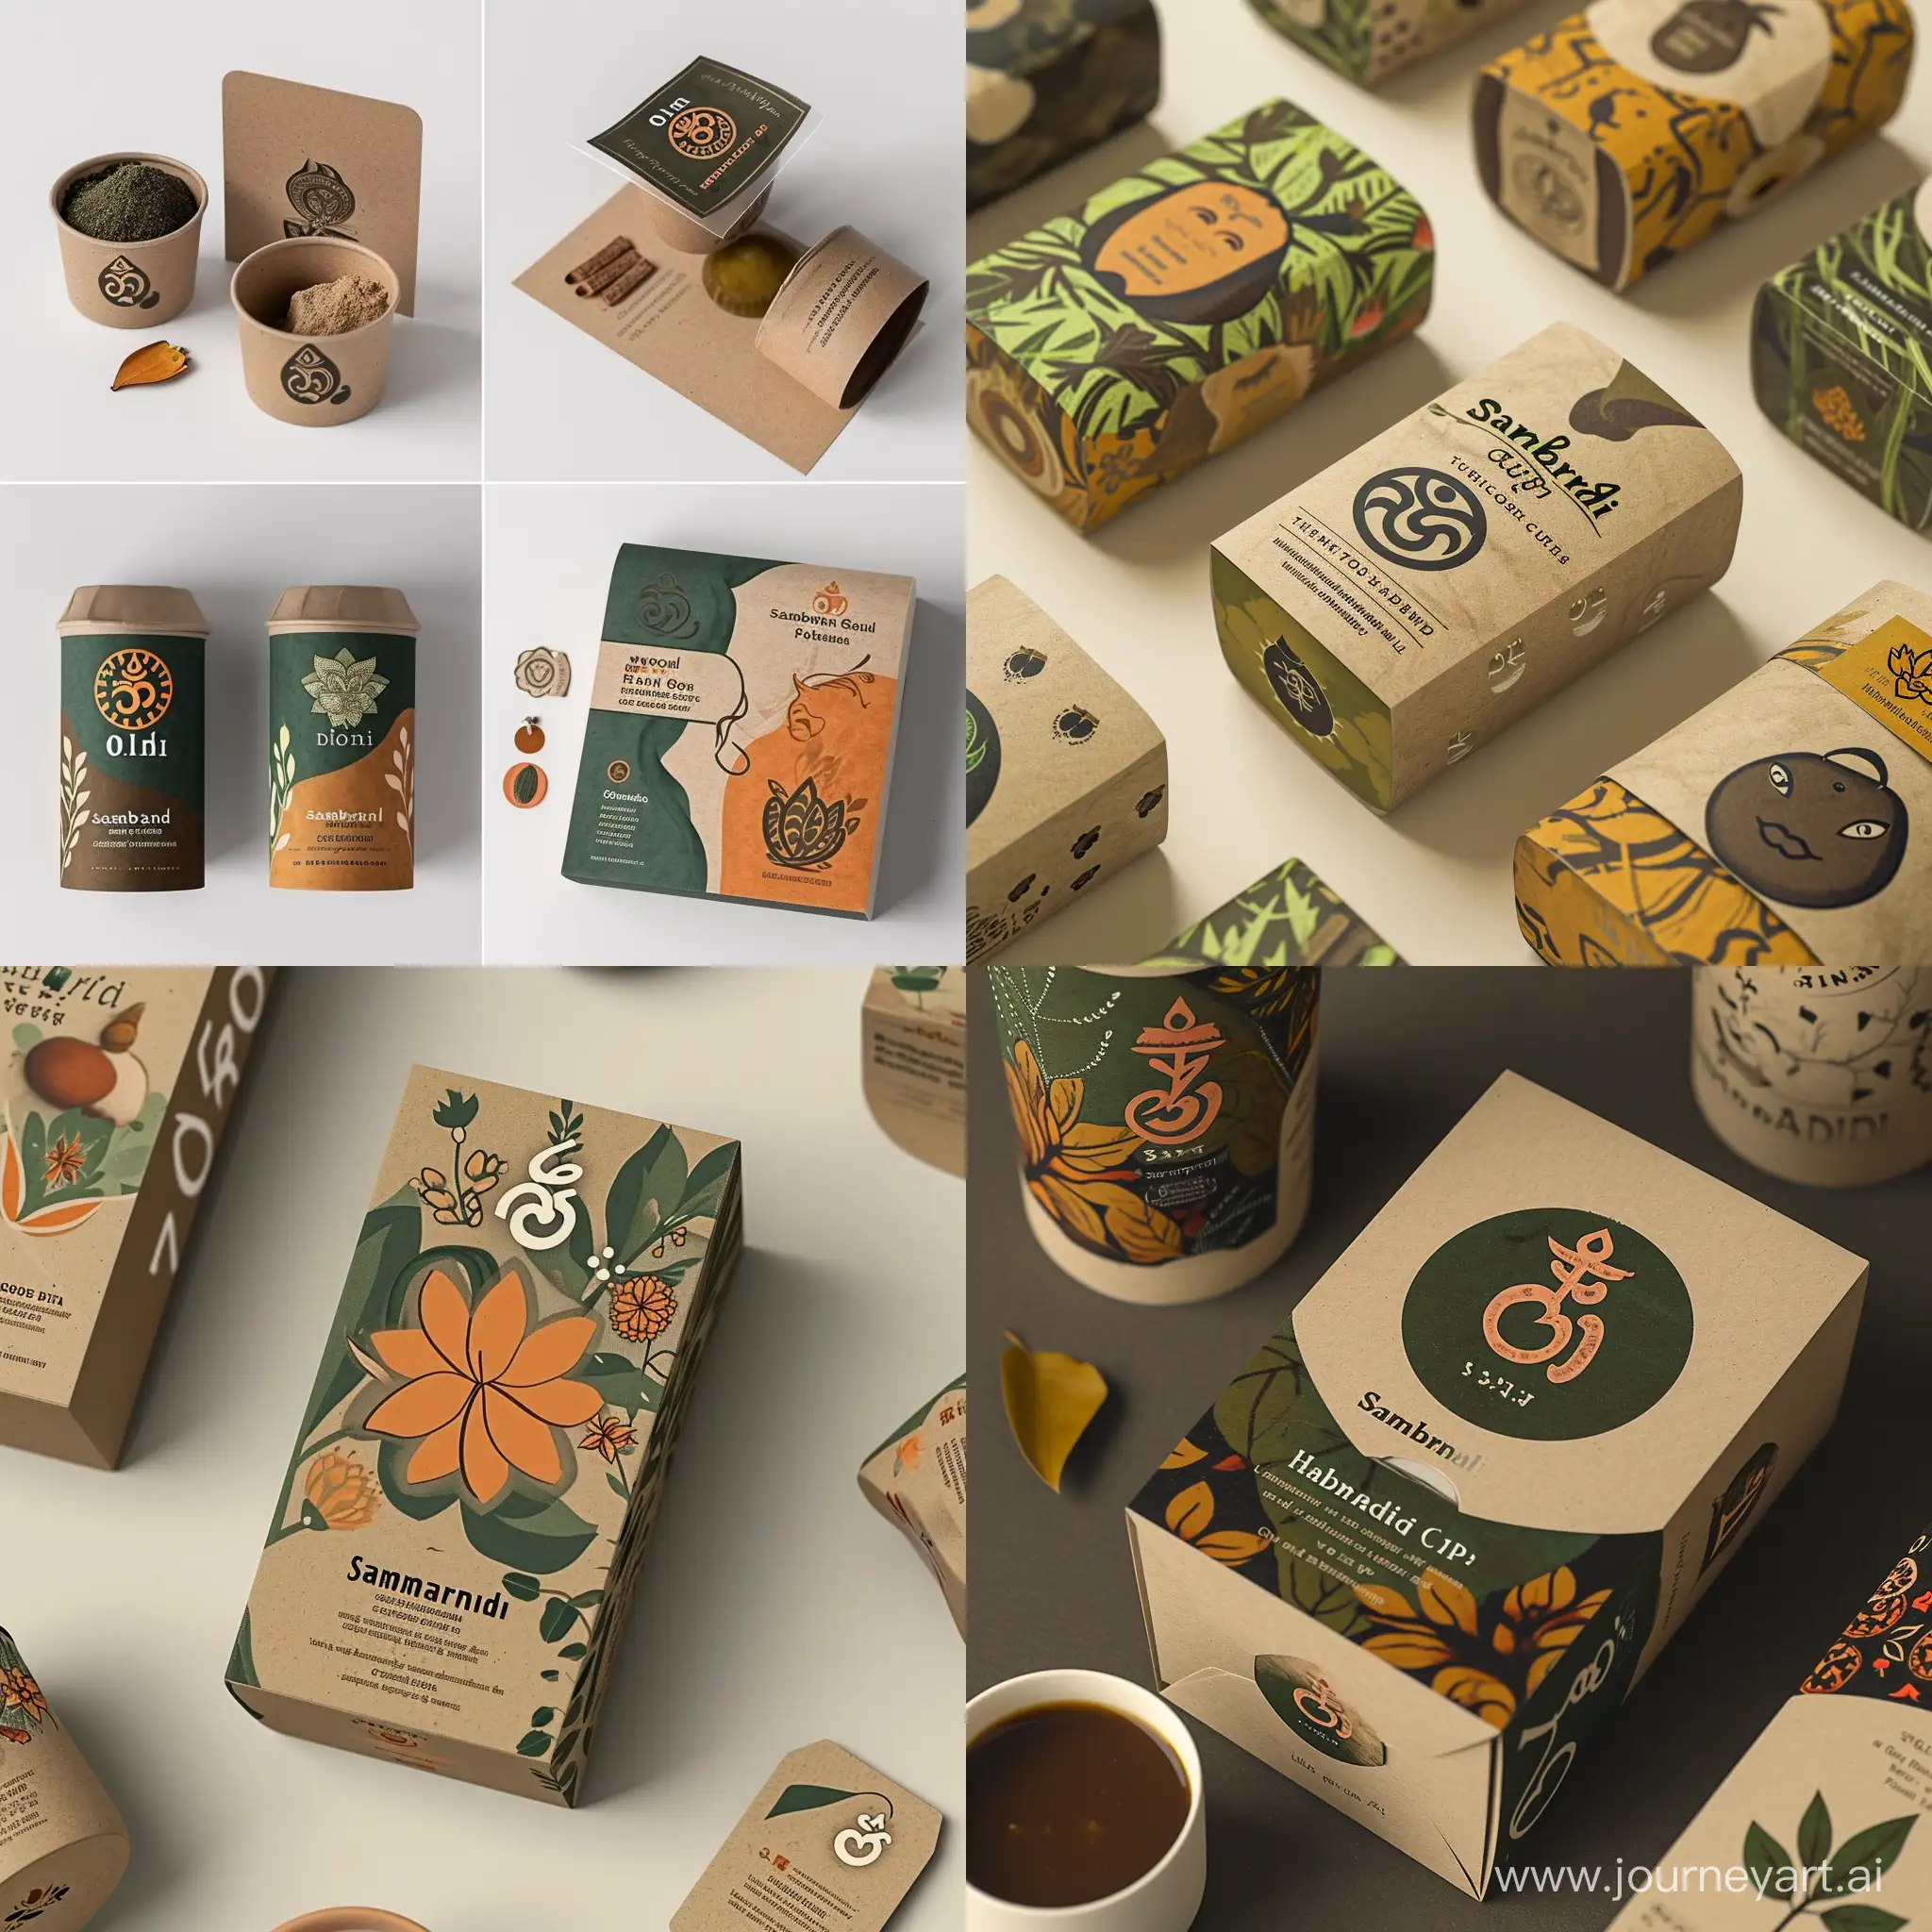 "Create an image of an eco-friendly packaging design for Sambrani Havan Cups. The packaging should be made of sustainable materials like kraft paper or recycled paper. It should feature earthy color tones such as browns and greens, and include traditional or spiritual symbols like the 'Om' sign or a lotus. The design should subtly showcase the ingredients like cow dung, sandalwood, and herbs through pictograms or icons. Incorporate an element that allows the aroma to be sampled without opening the package. Add a handmade touch, like a small tag or a note about the artisans, and ensure the overall look is elegant yet simple, evoking a sense of peace and simplicity. The background should be neutral to emphasize the packaging design."